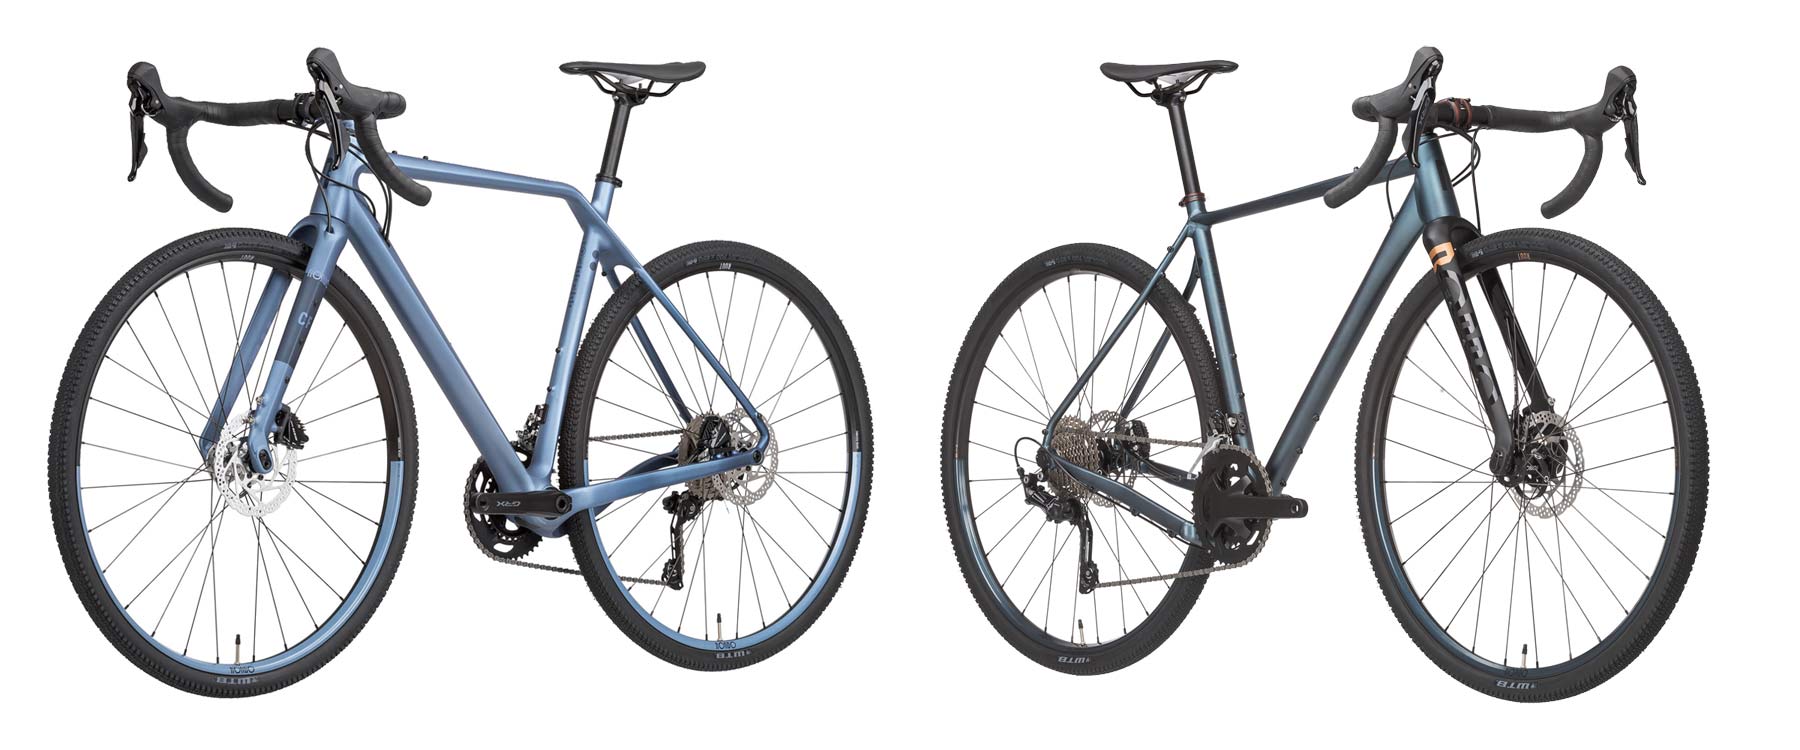 2021 Rondo Ruut 2X gravel bikes with GRX in carbon or alloy